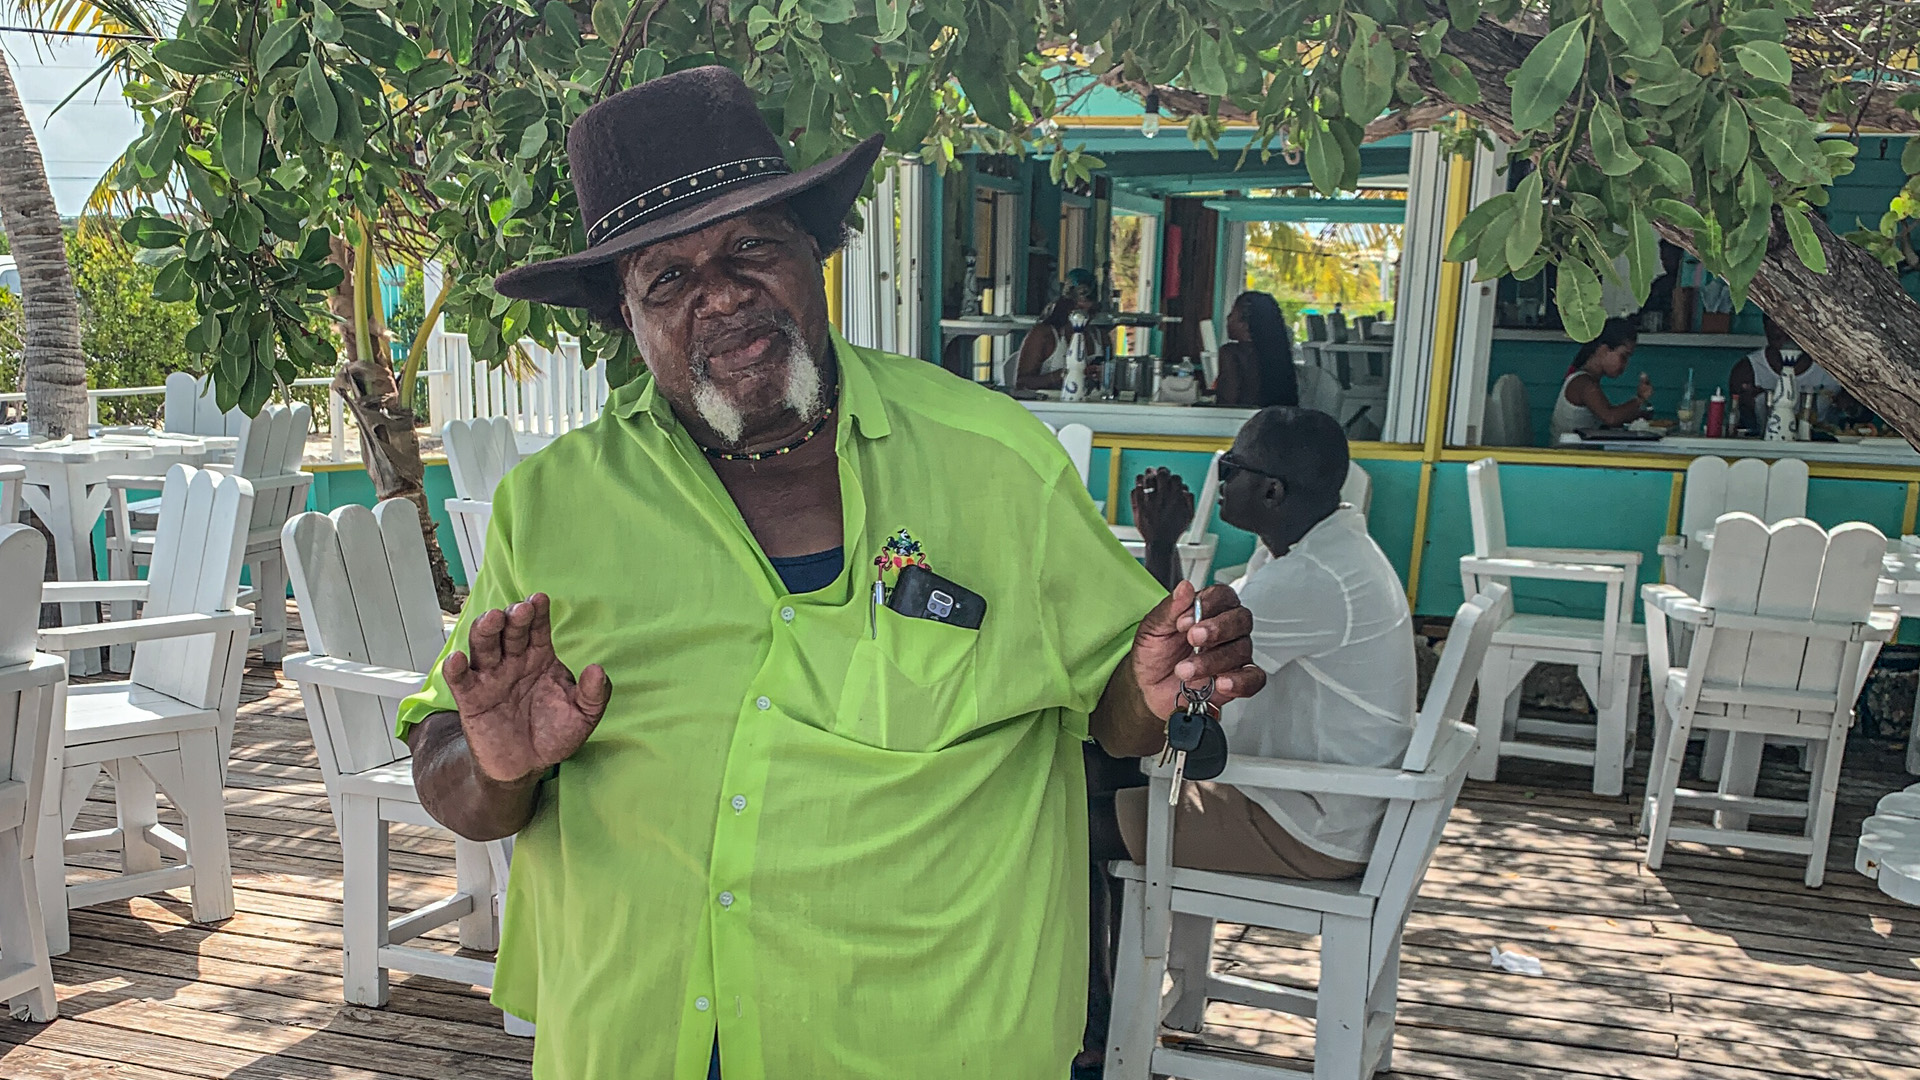 Dr Love gave us an amazing personal tour of the island, including this stop for a refreshing frozen mango cocktail at Bugaloo's Conch Crawl.